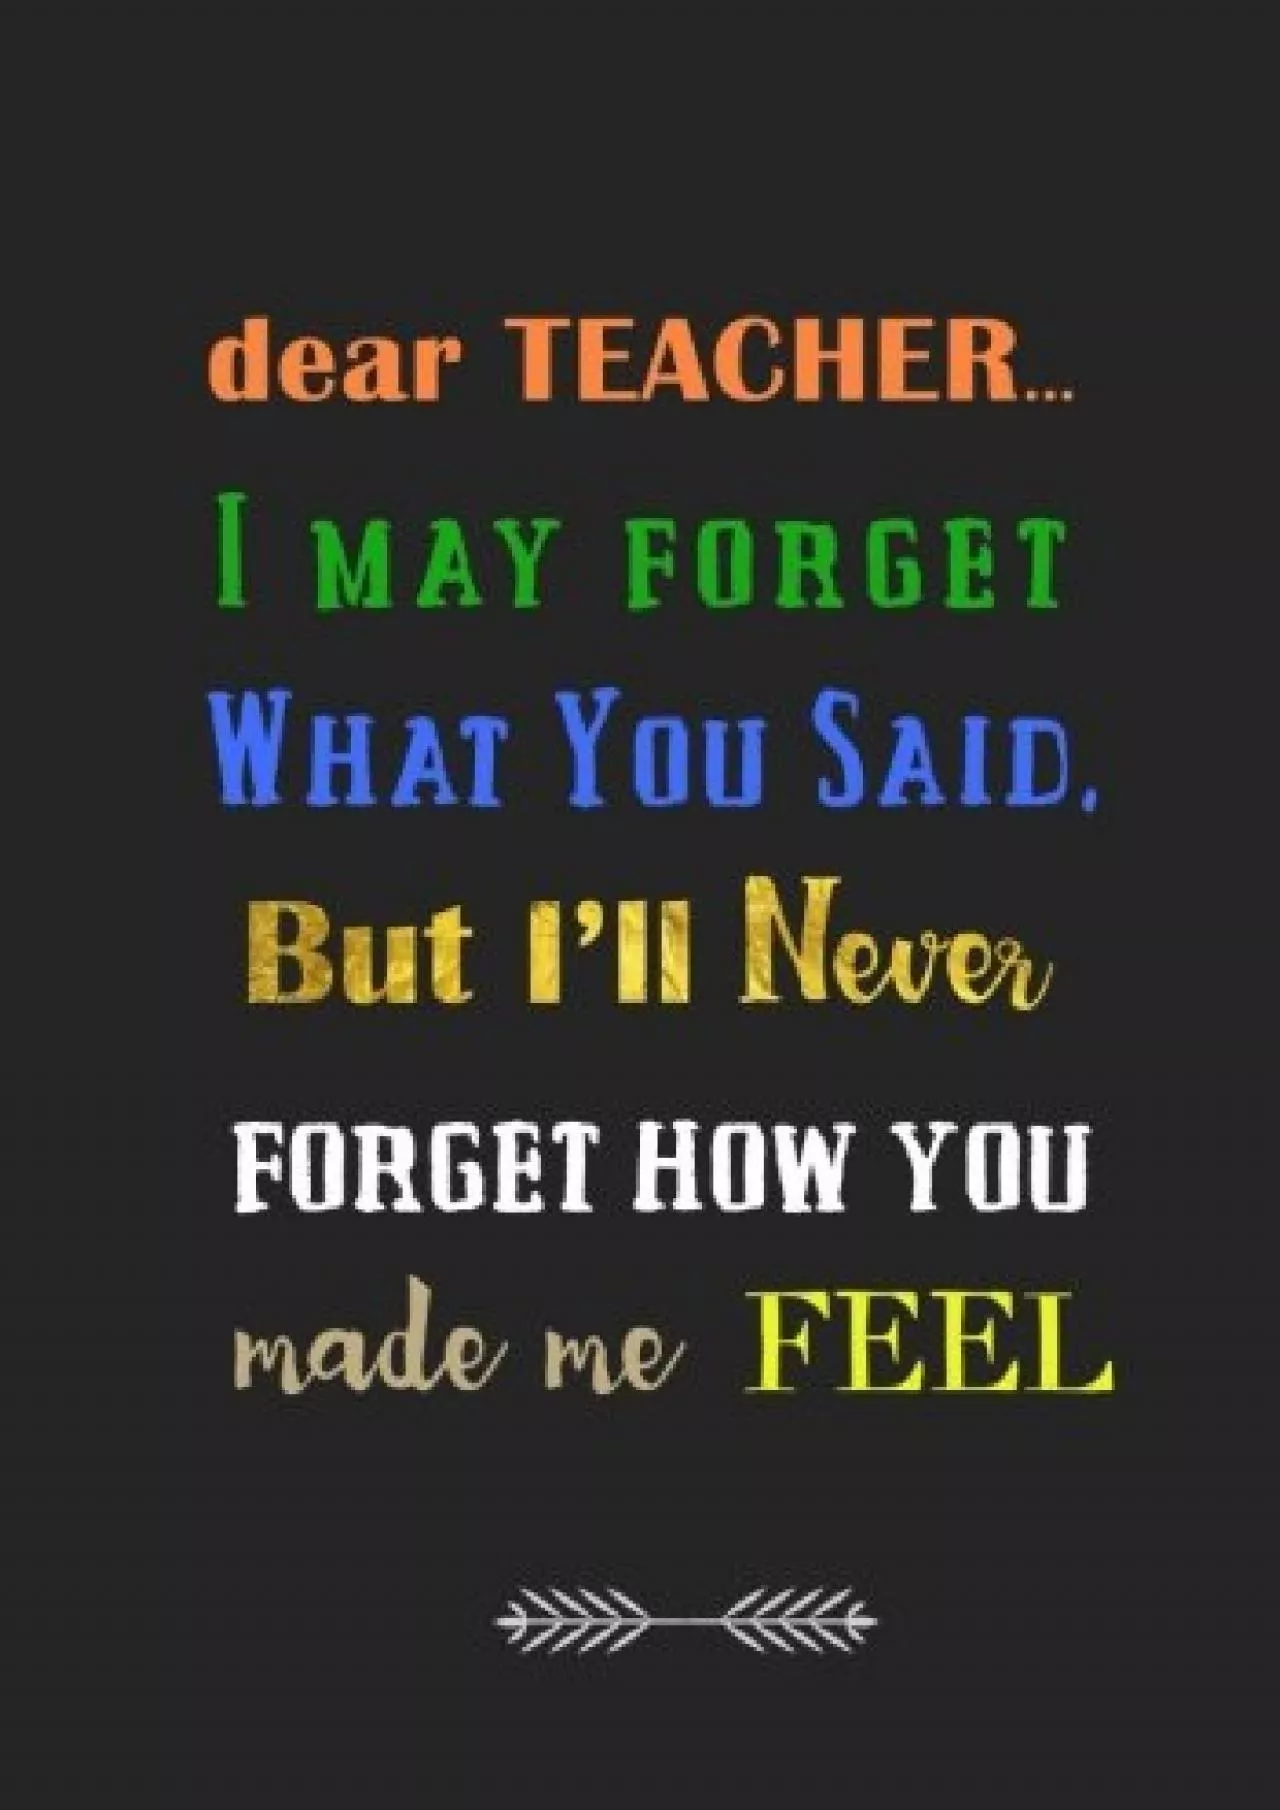 [DOWNLOAD] Dear Teacher... I may forget what you said: A Journal containing Popular Inspirational